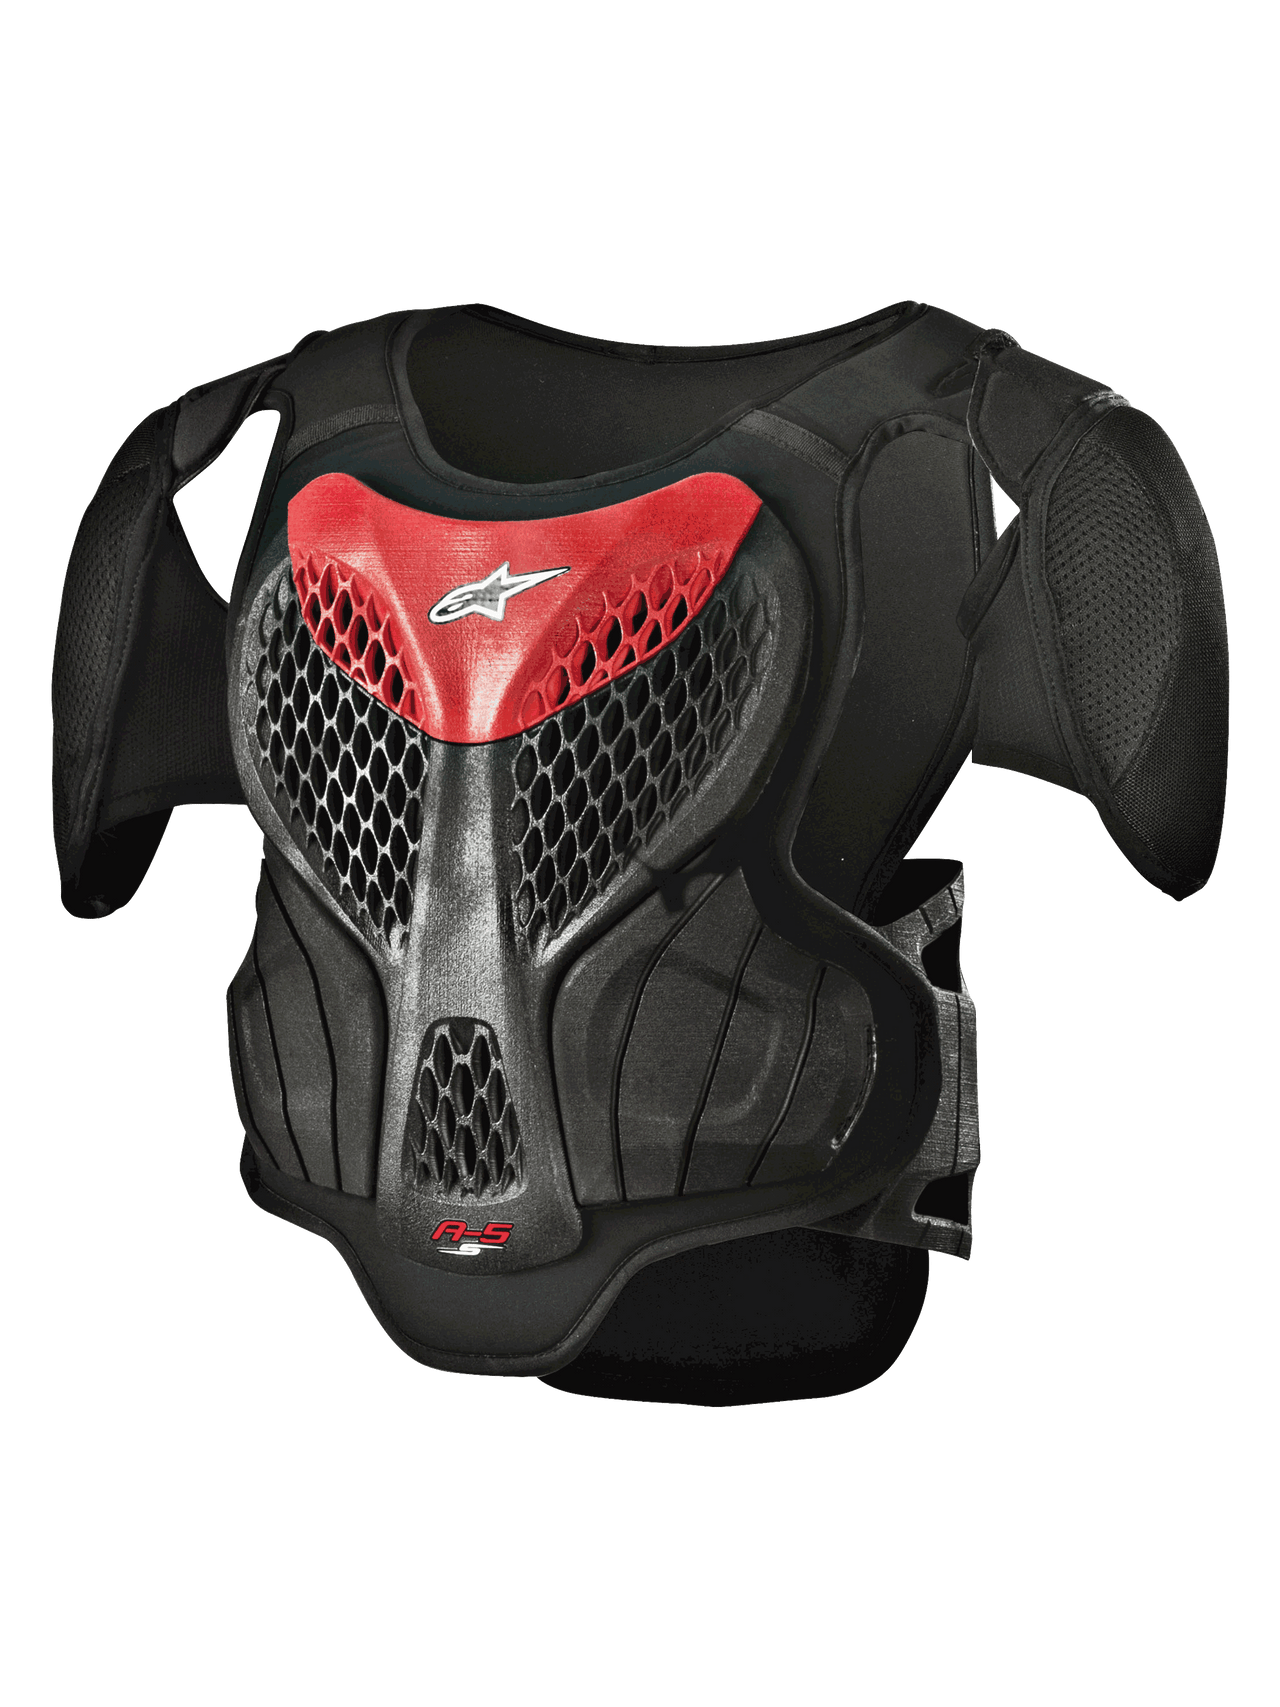 Youth Chest Protection